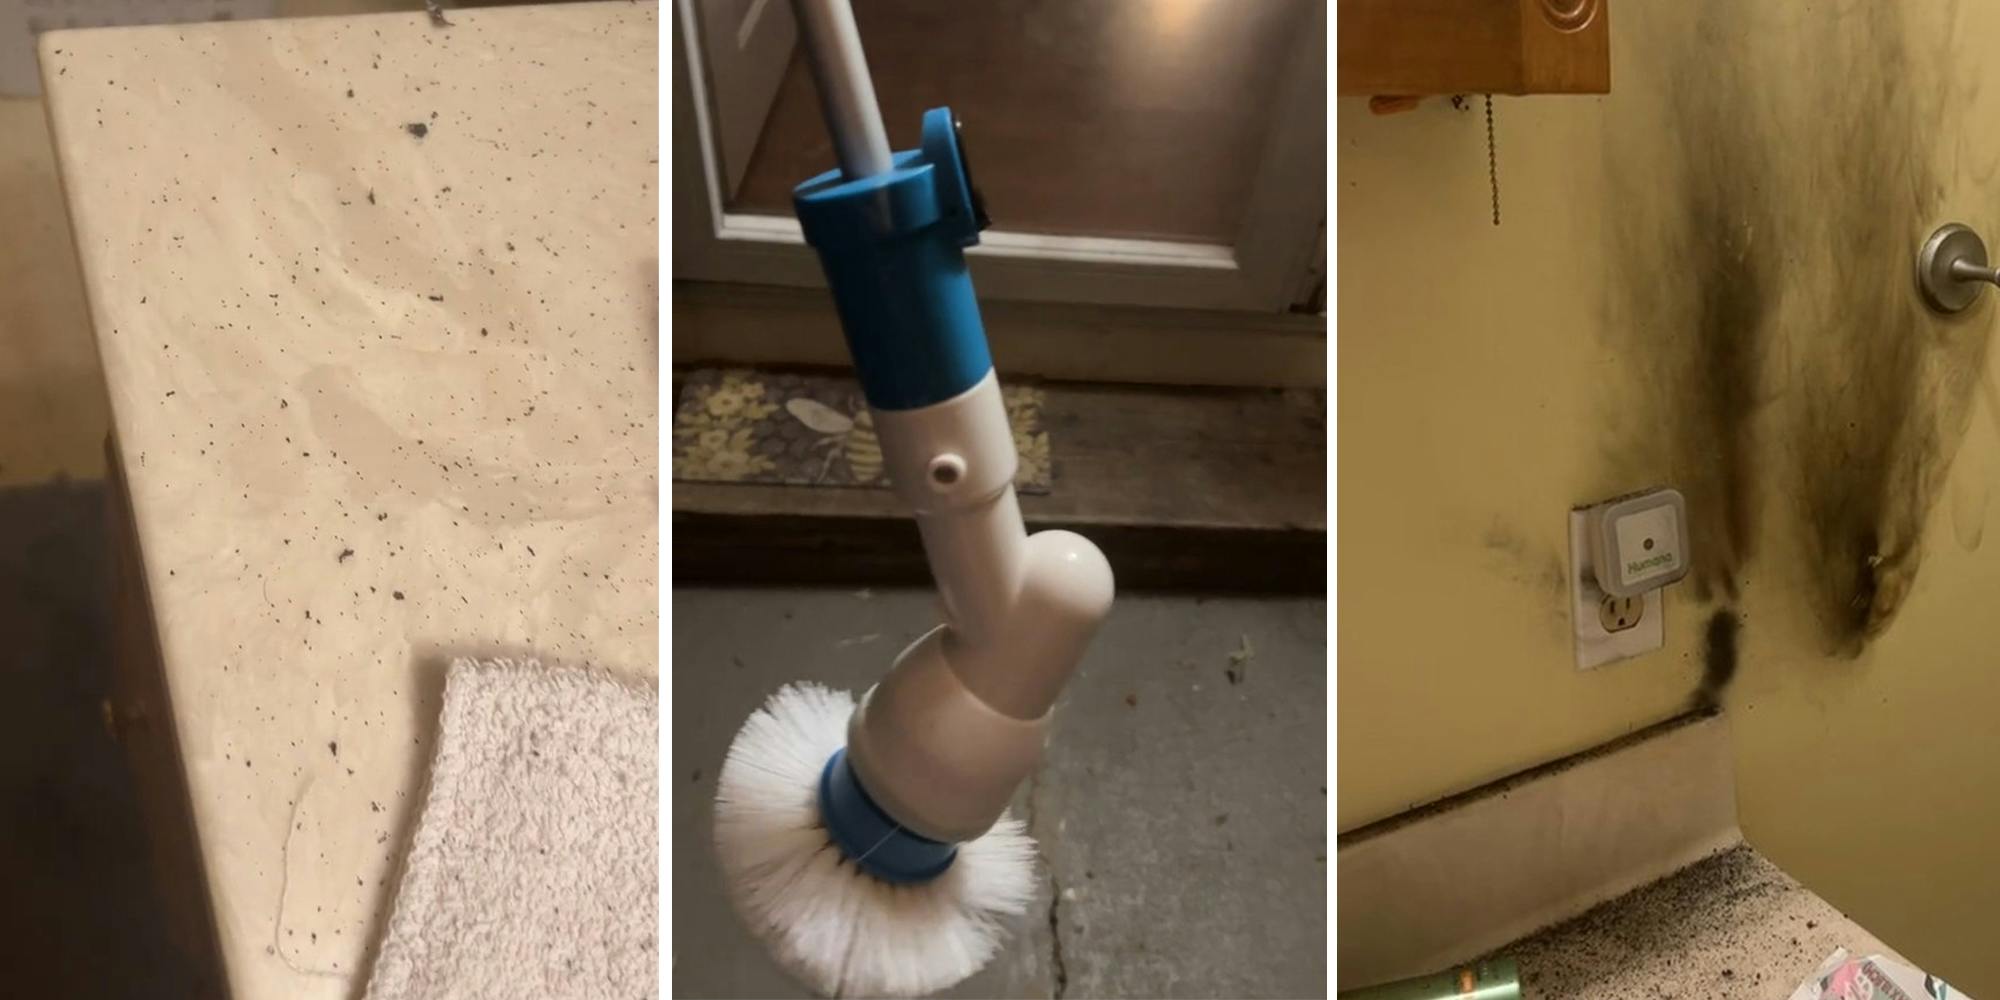 Woman says viral electric scrub brush ‘exploded’ while charging